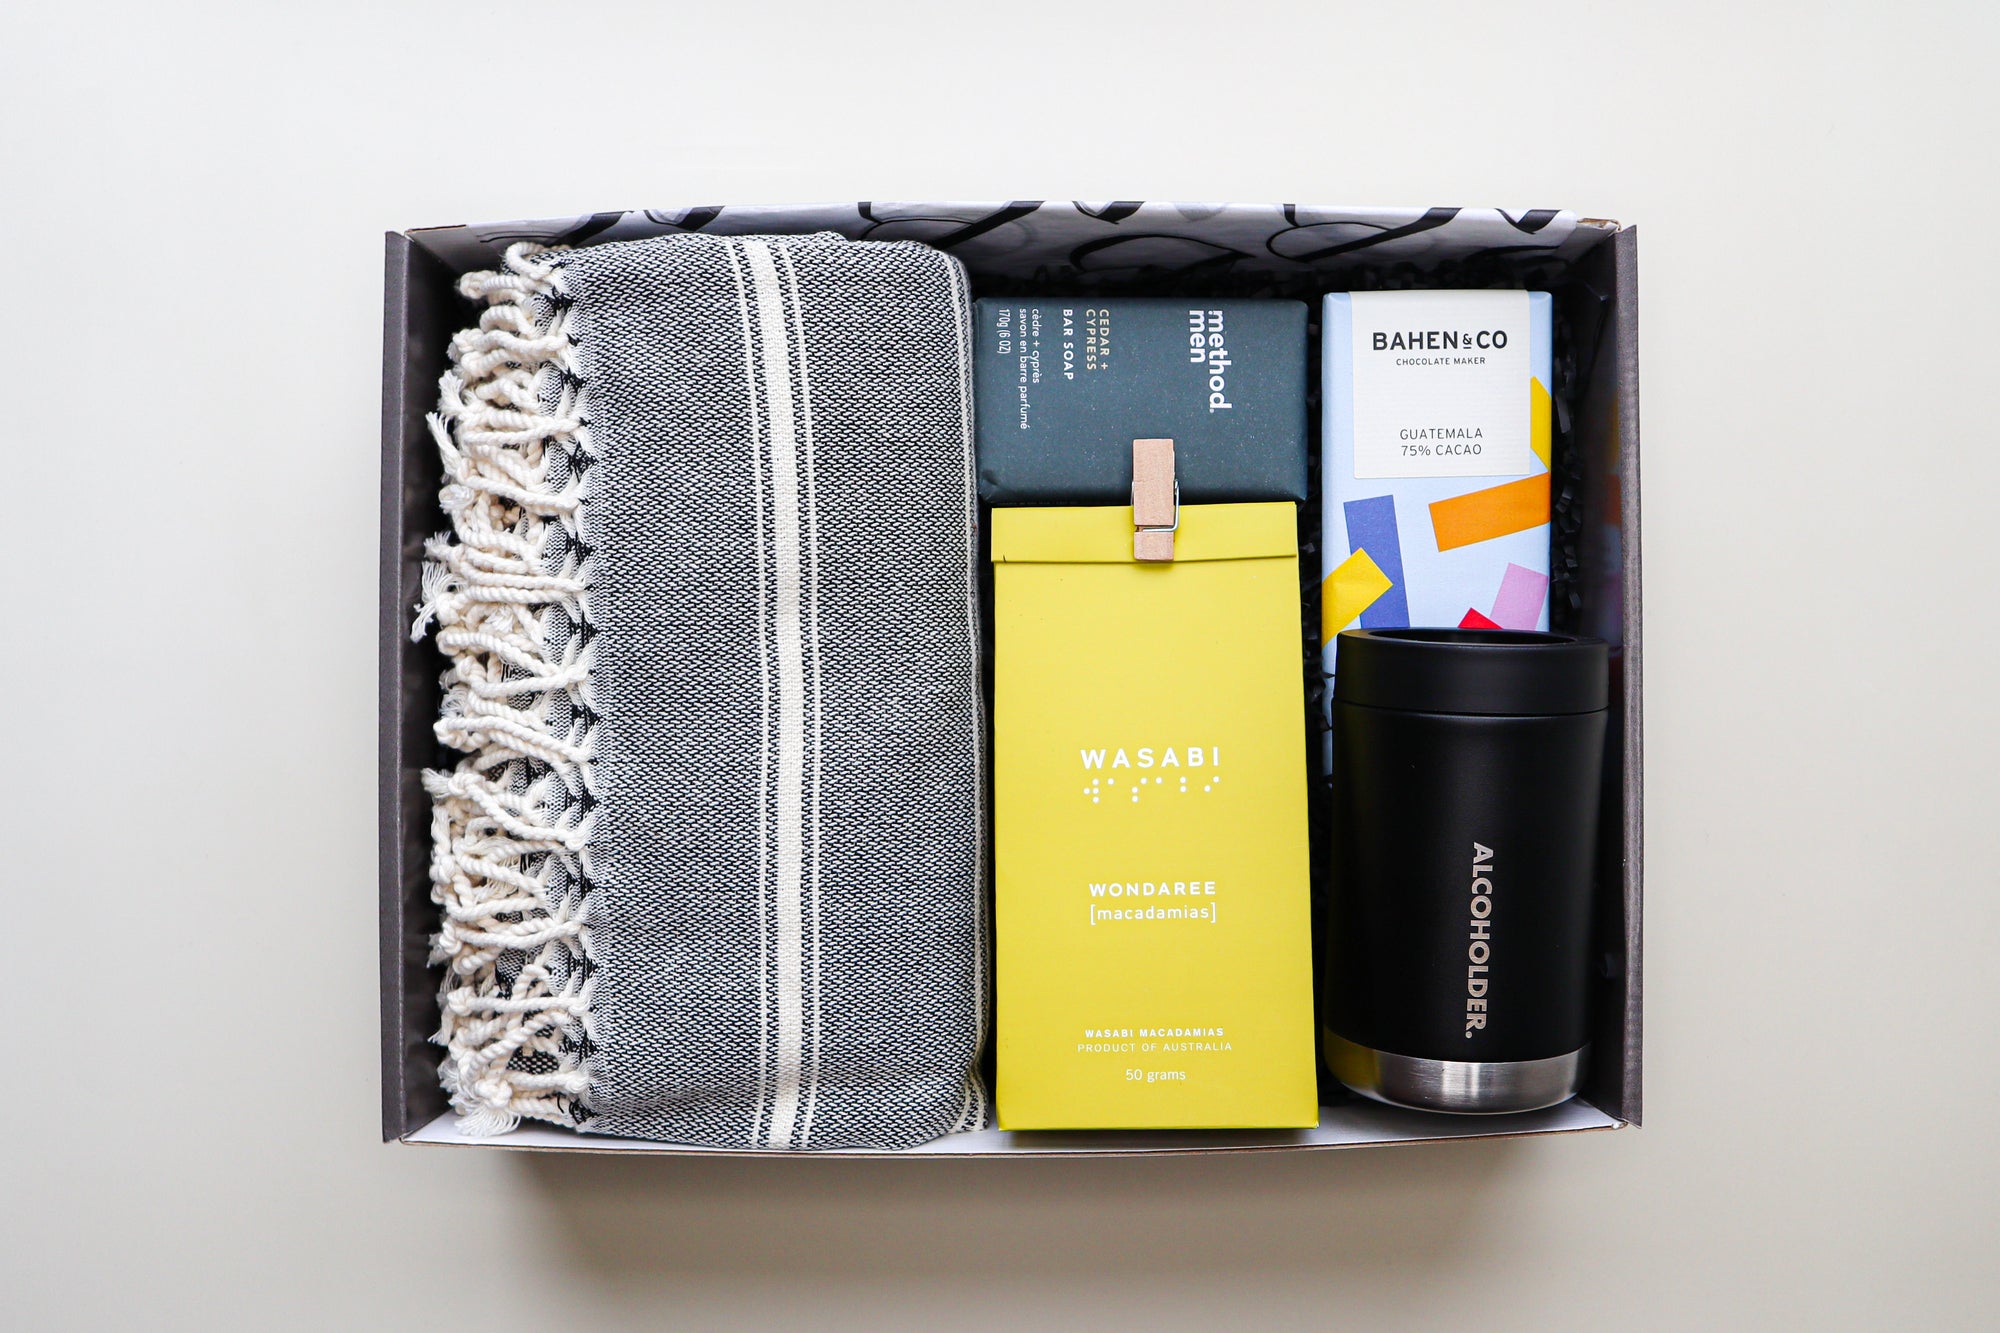 A beautiful gift box containing a grey and white striped Turkish Towel, a Method Man Bar Soap, a yellow pack of Wondaree Wasabi Macadamias closed a the top with a timber peg, a colourful bar of Bahen & Co Chocolate and a black and steel Alcoholder